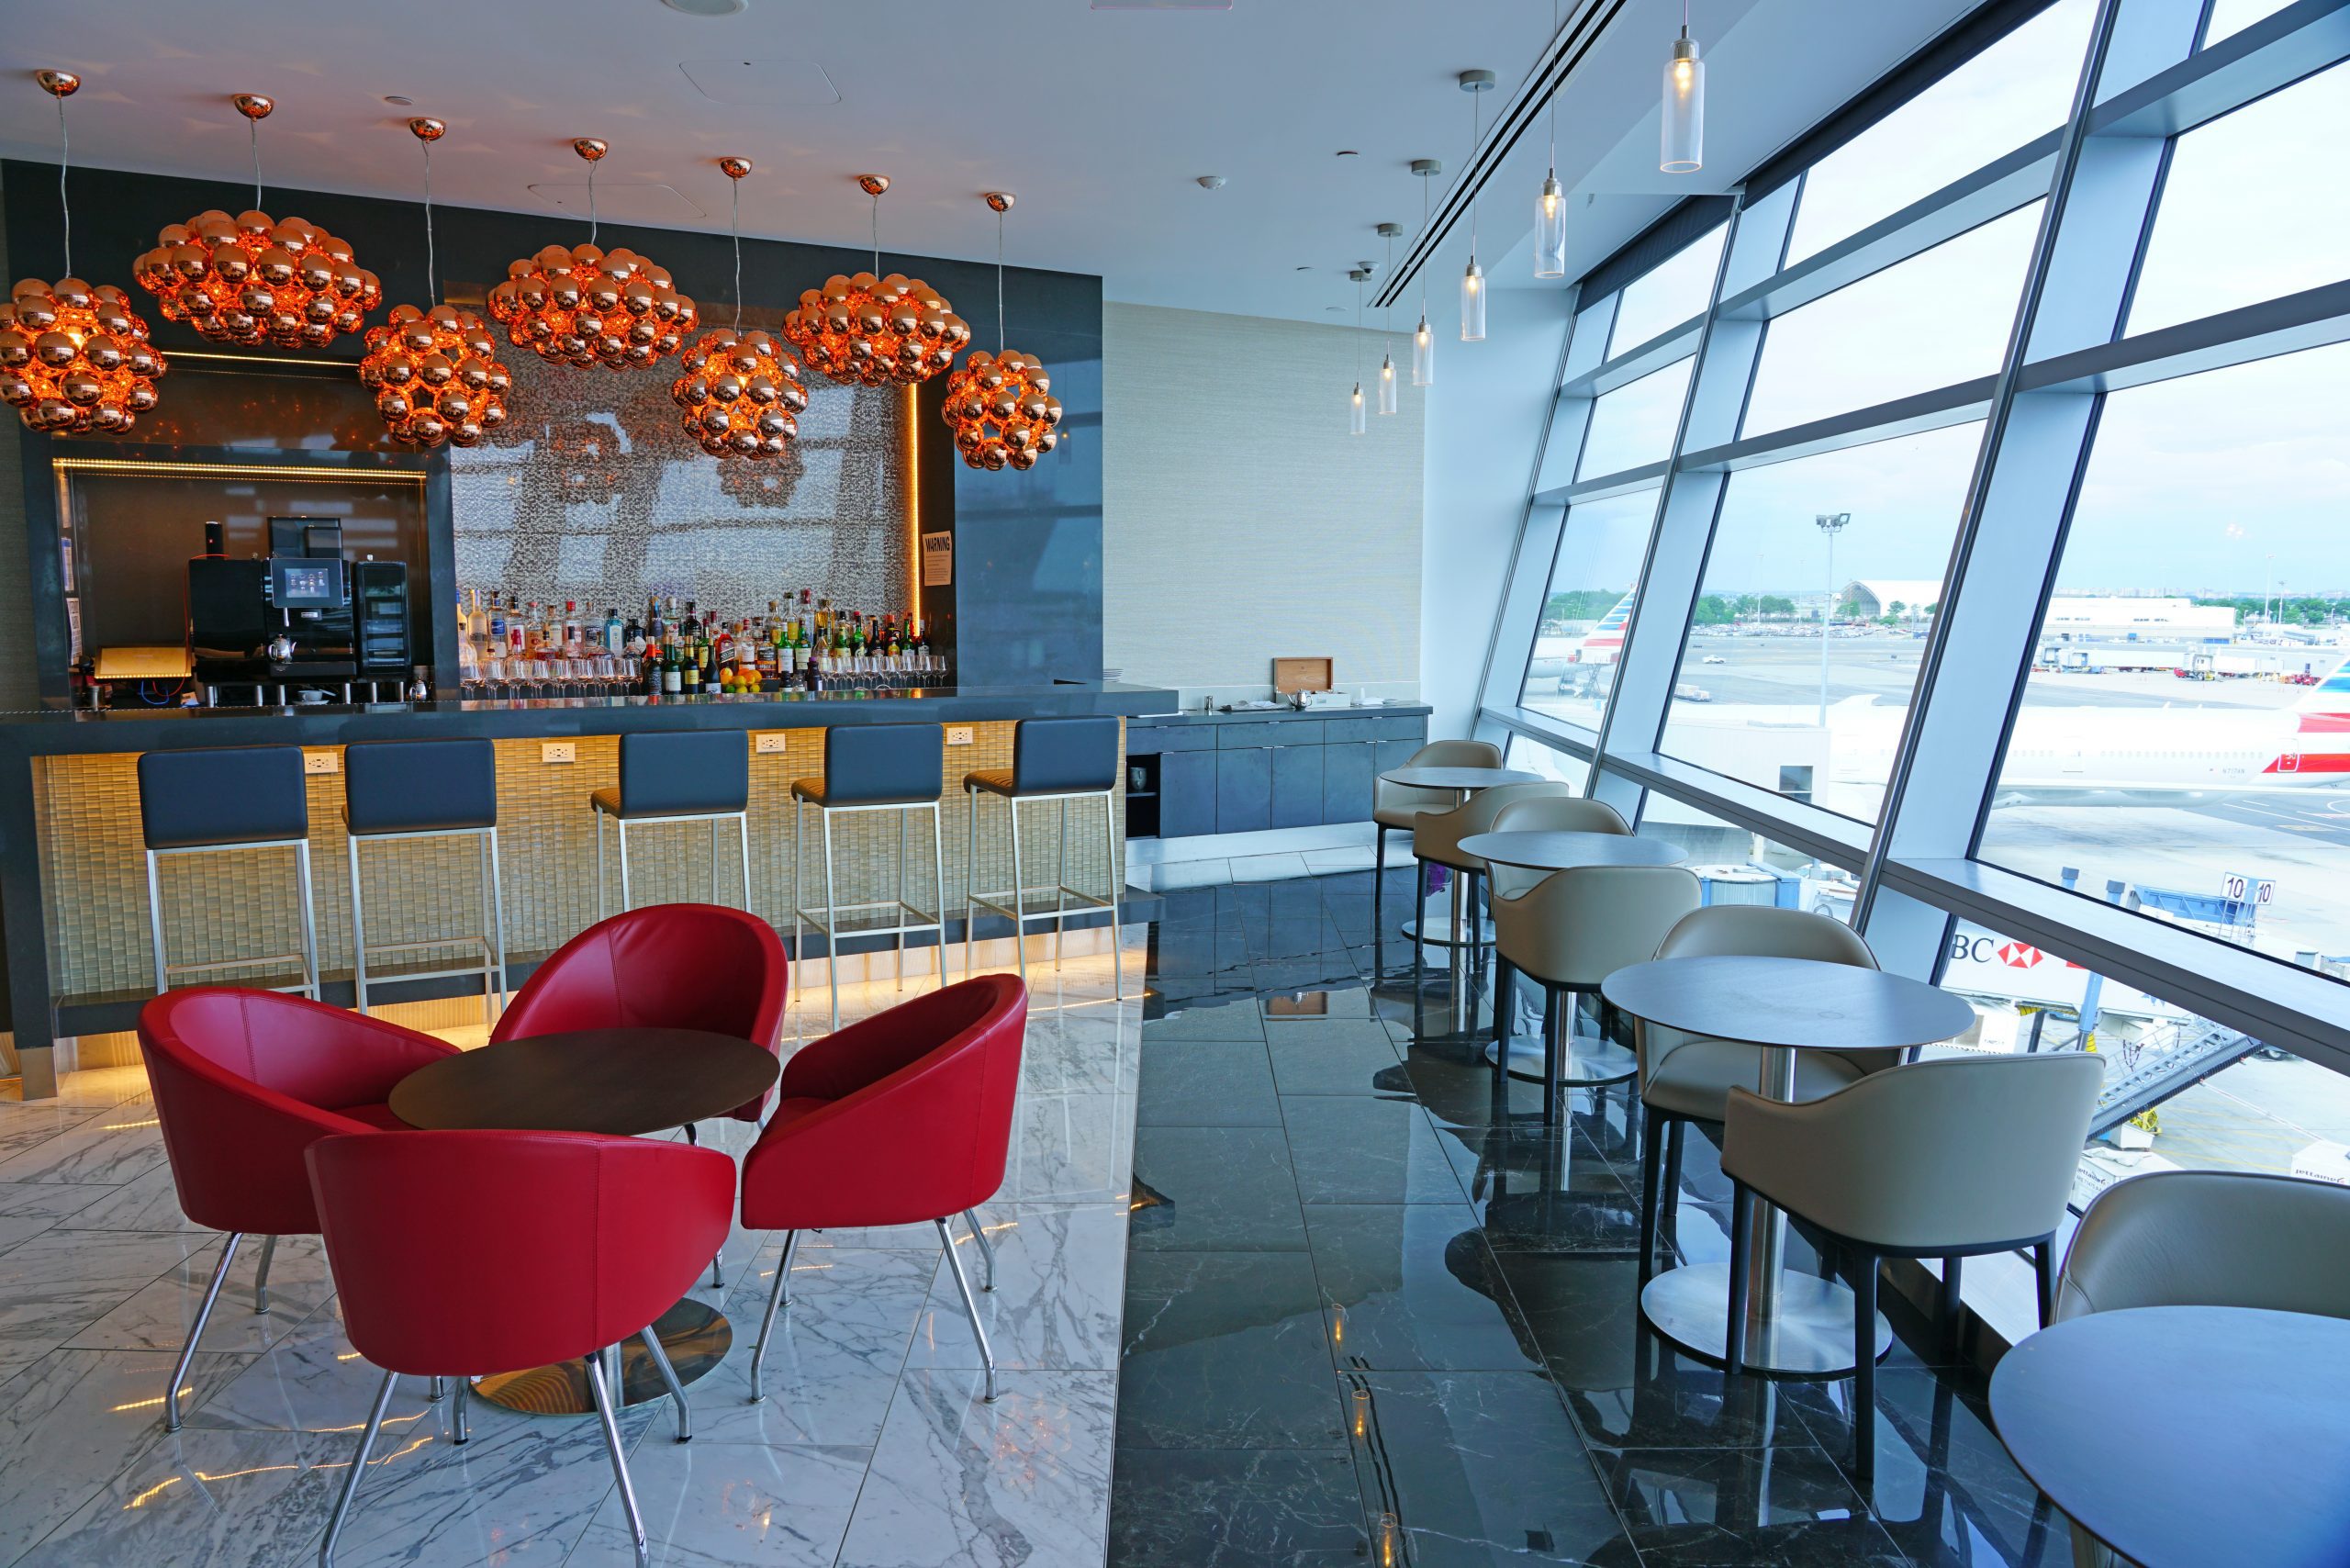 New American Airlines lounge at JFK international airport